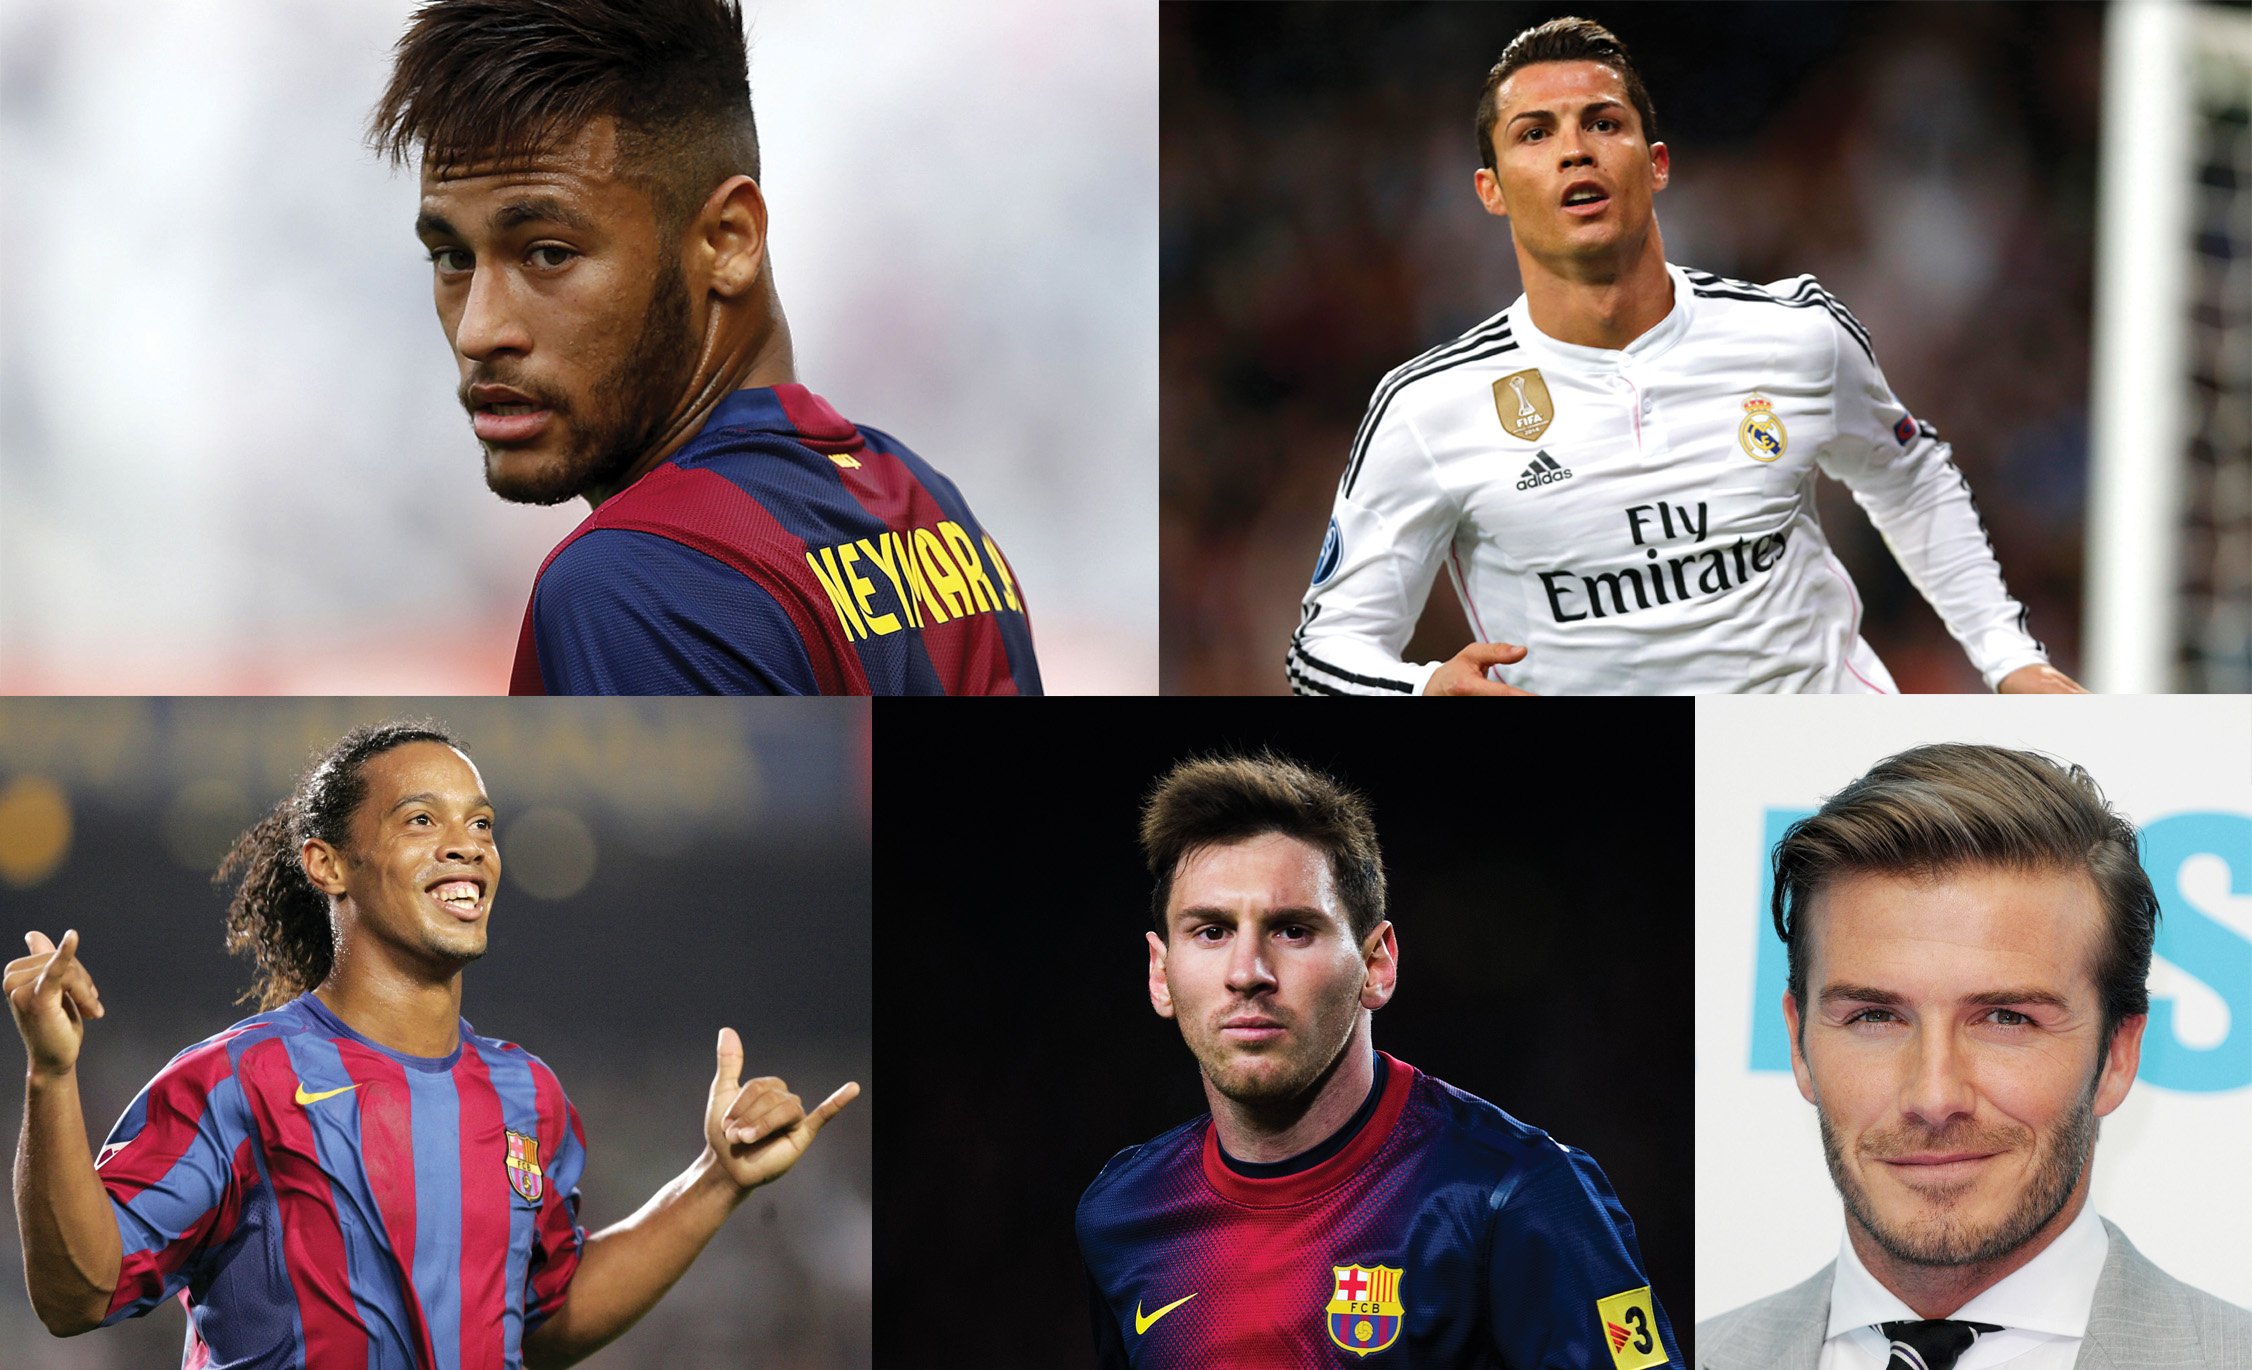 Five Famous Football Players To Follow On Instagram